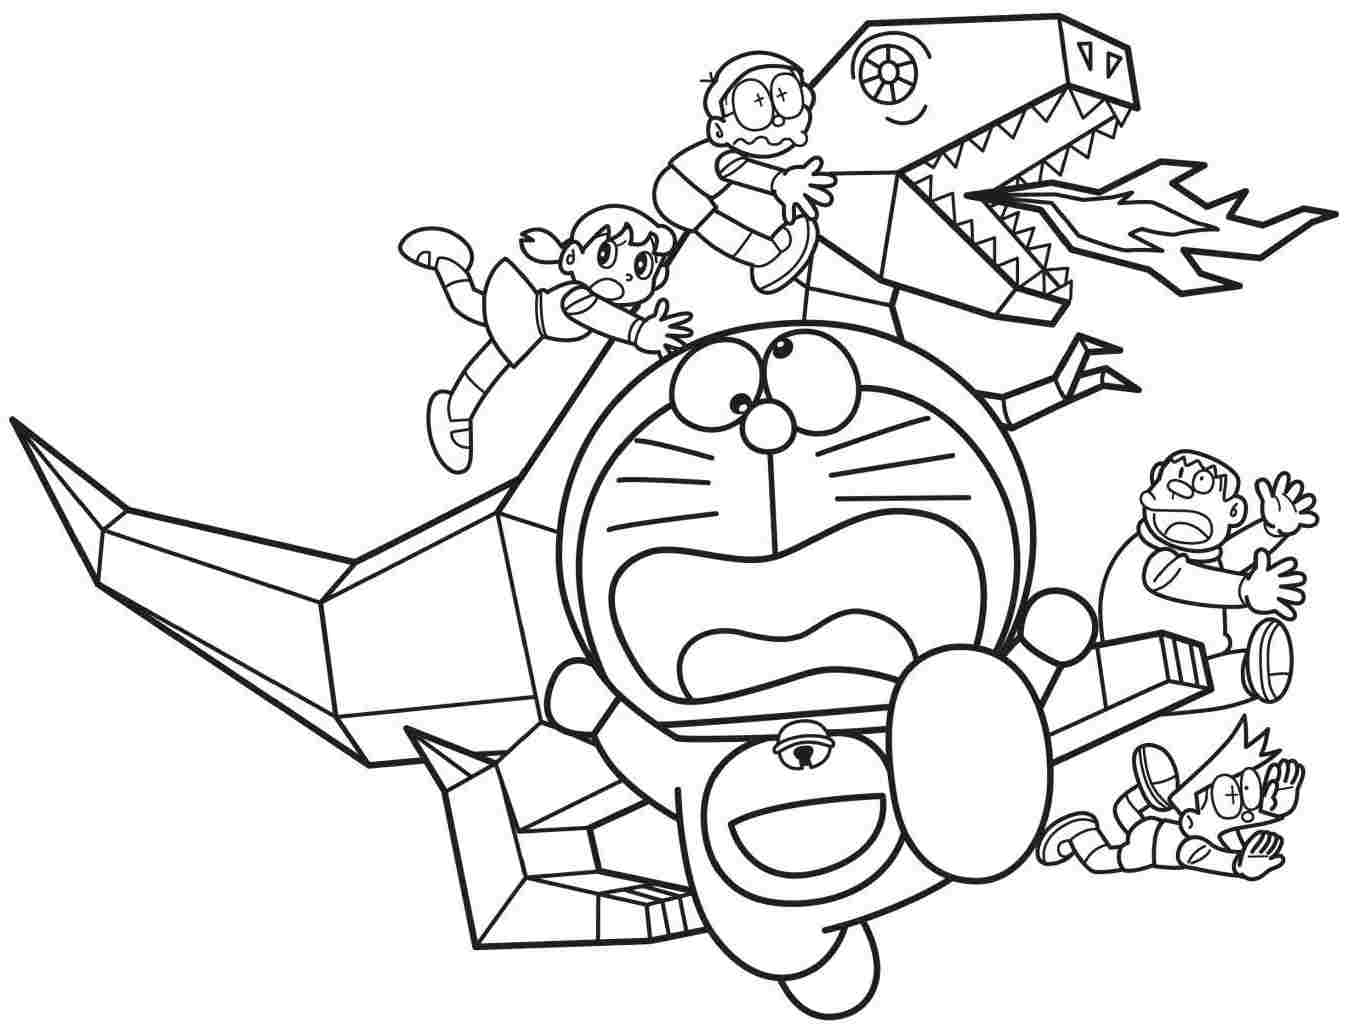 Download Doraemon And Paper Dinosaur Coloring Page - Free Printable Coloring Pages for Kids